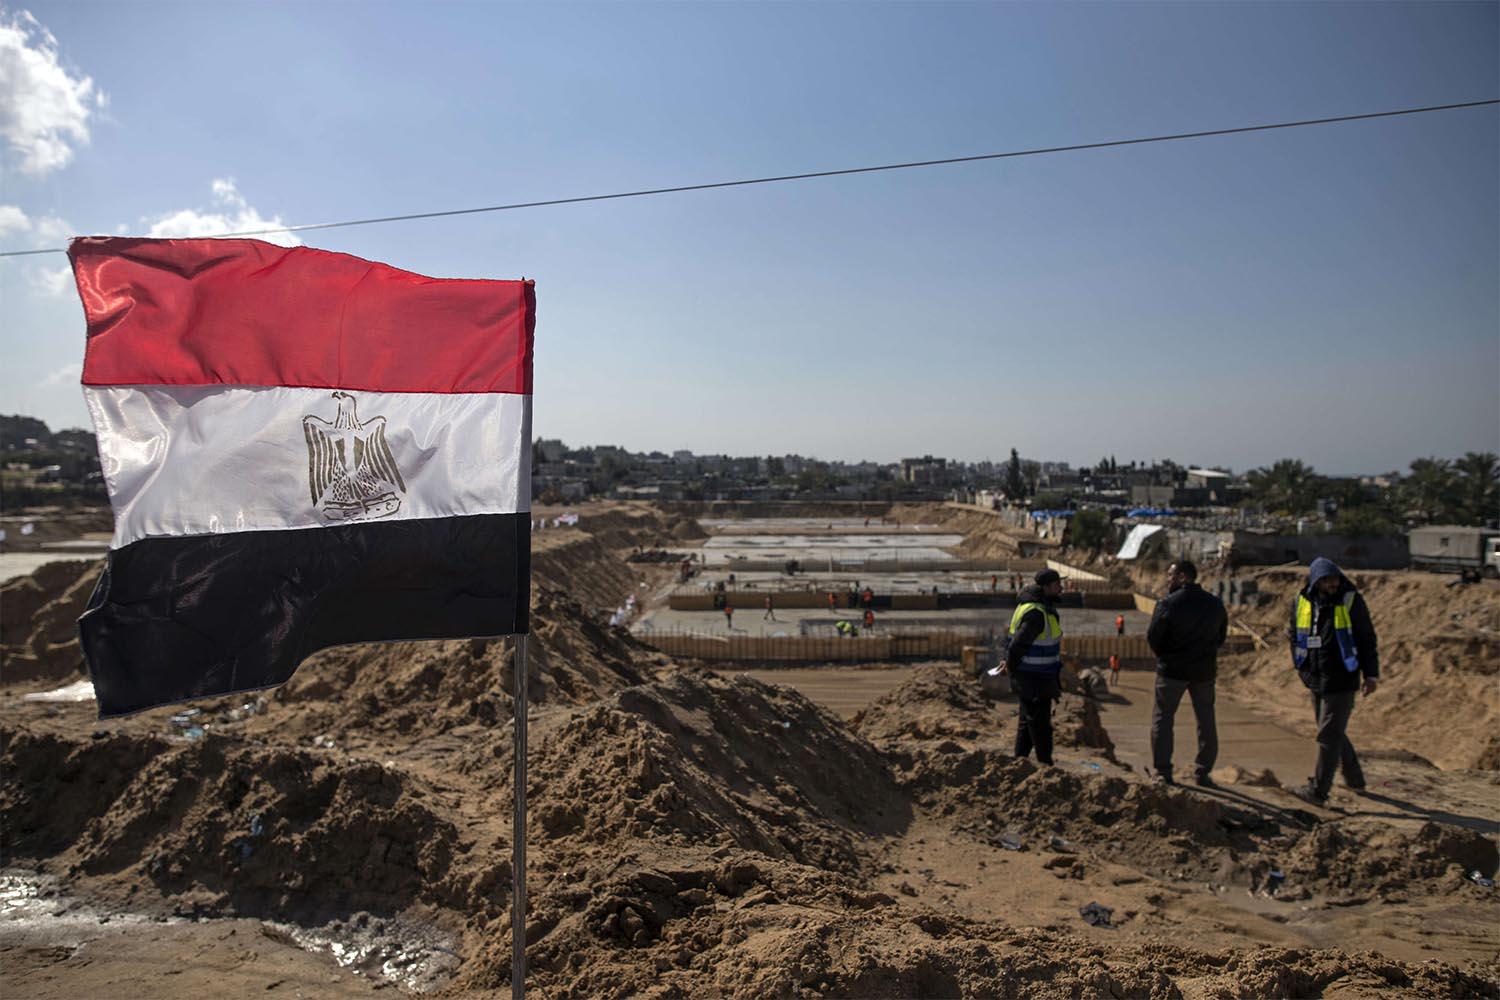 , Egypt pledged $500 million to rebuild the territory and sent work crews to remove rubble